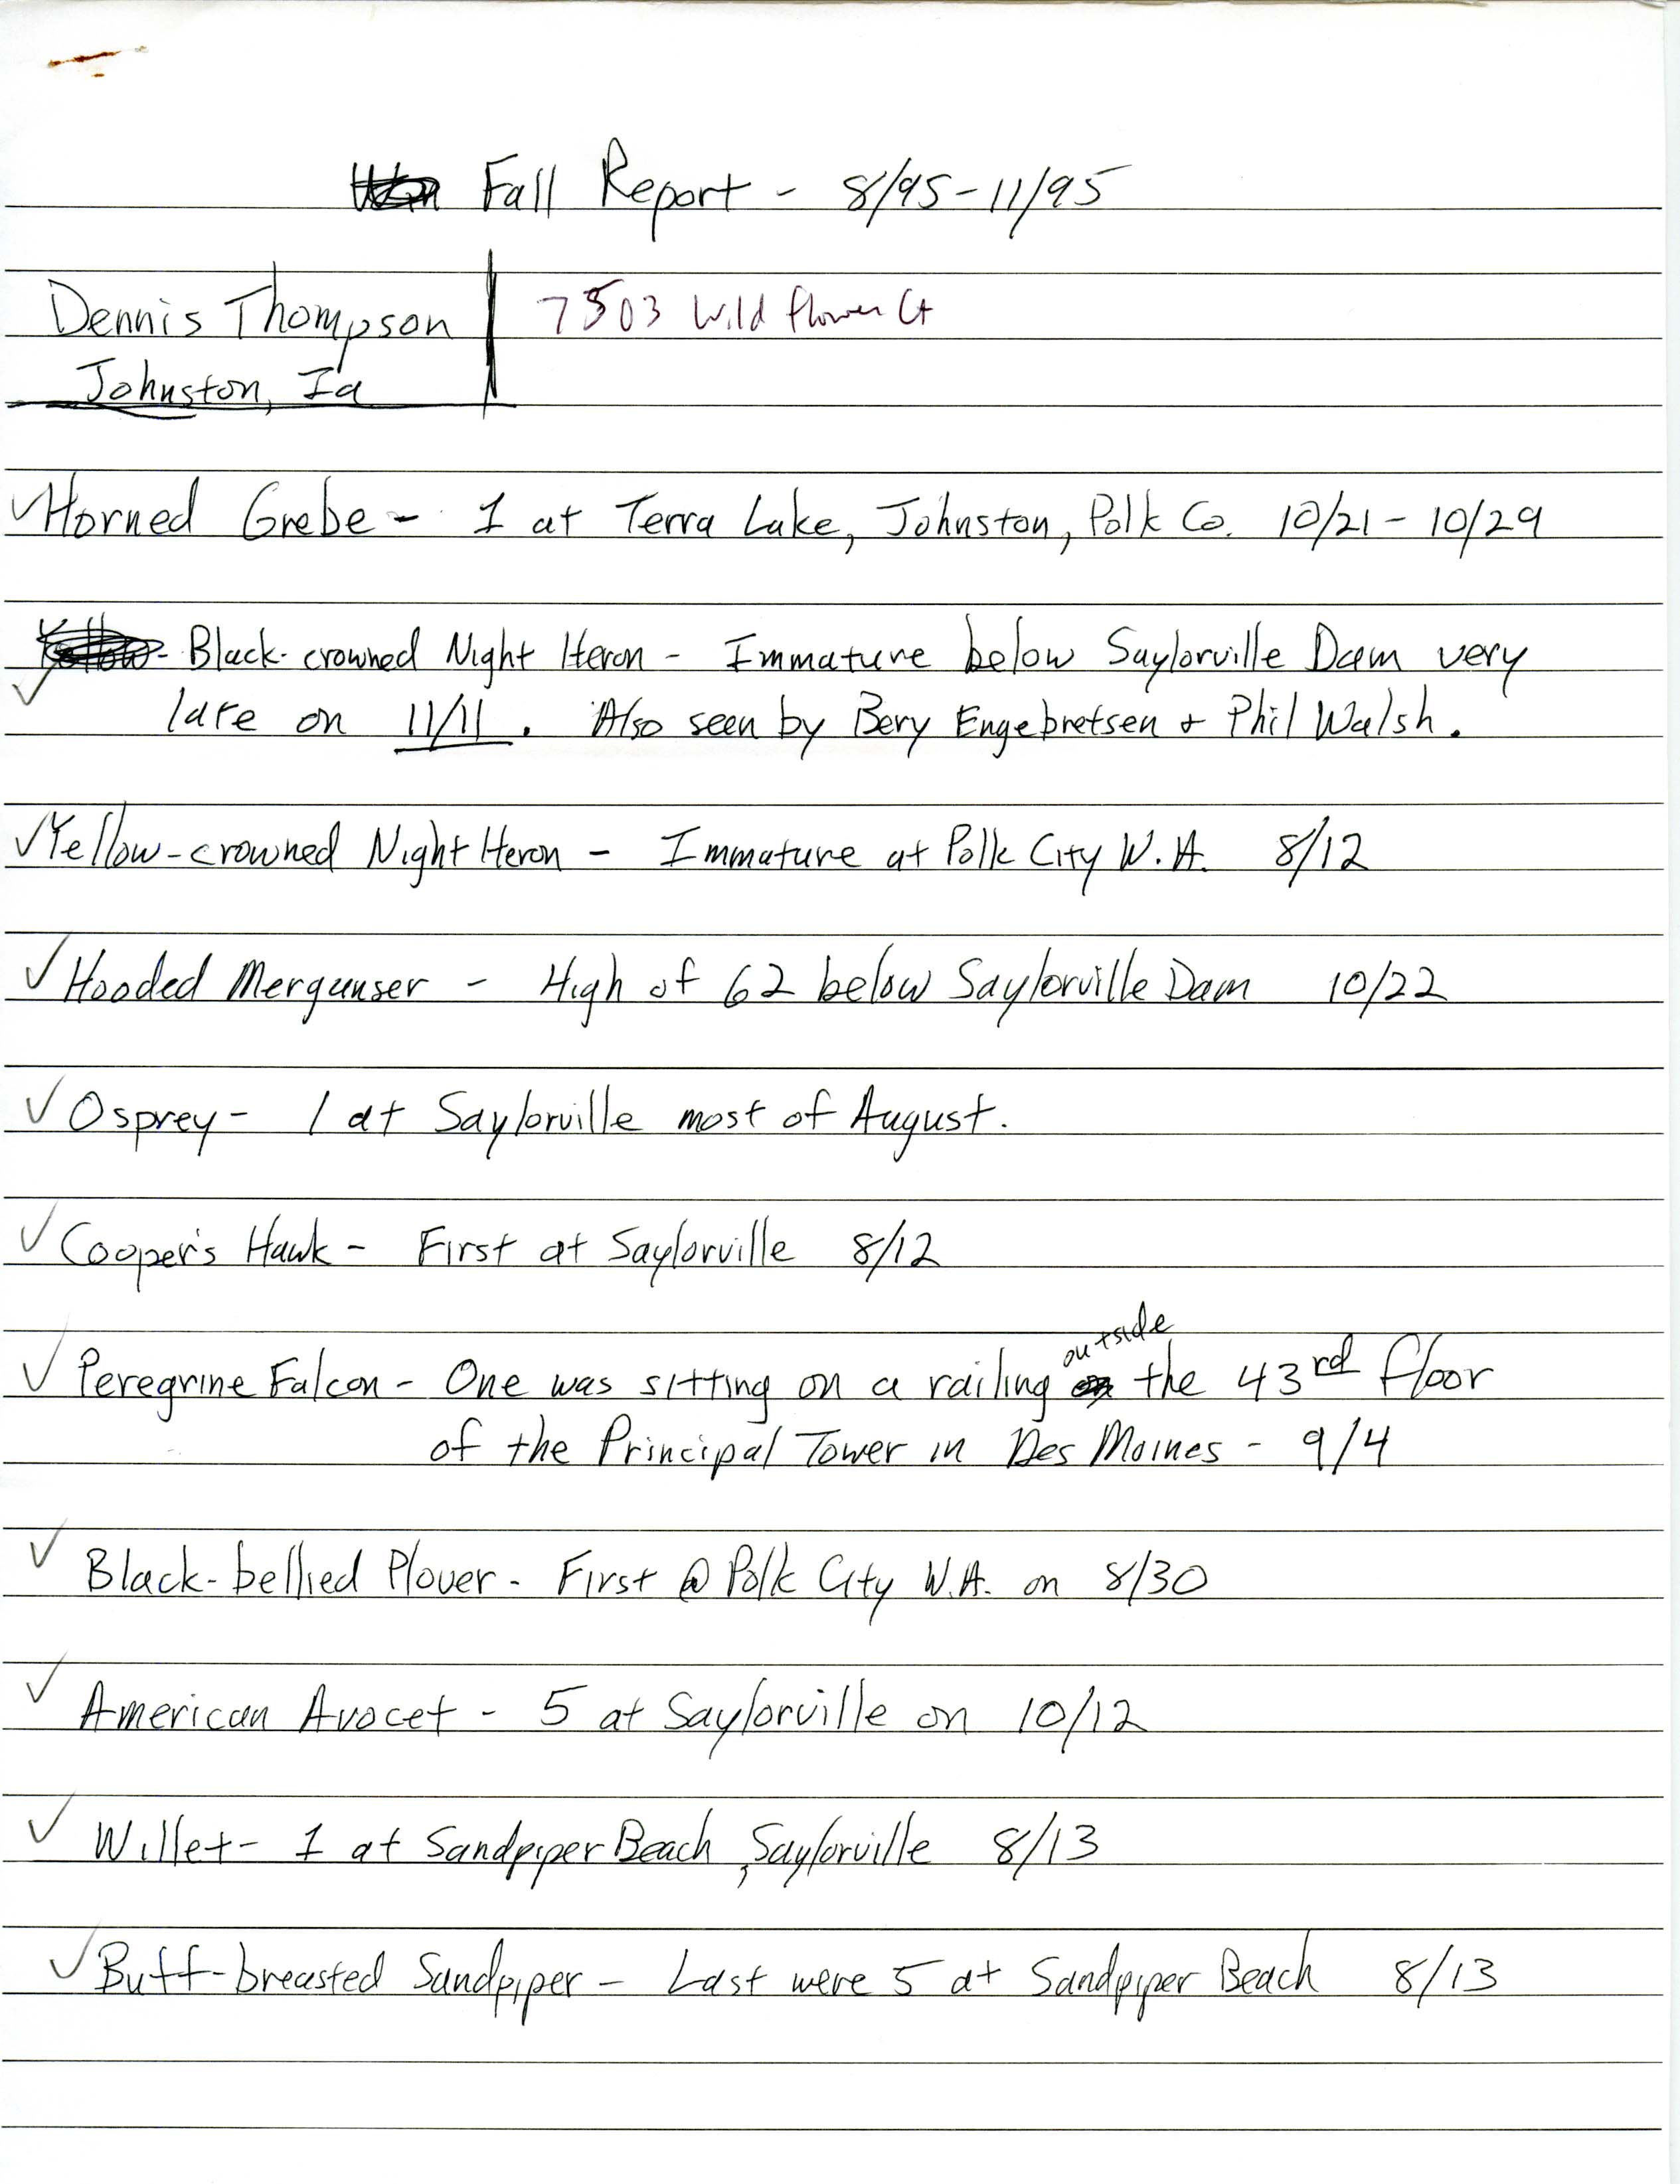 Field notes contributed by Dennis Thompson, fall 1995